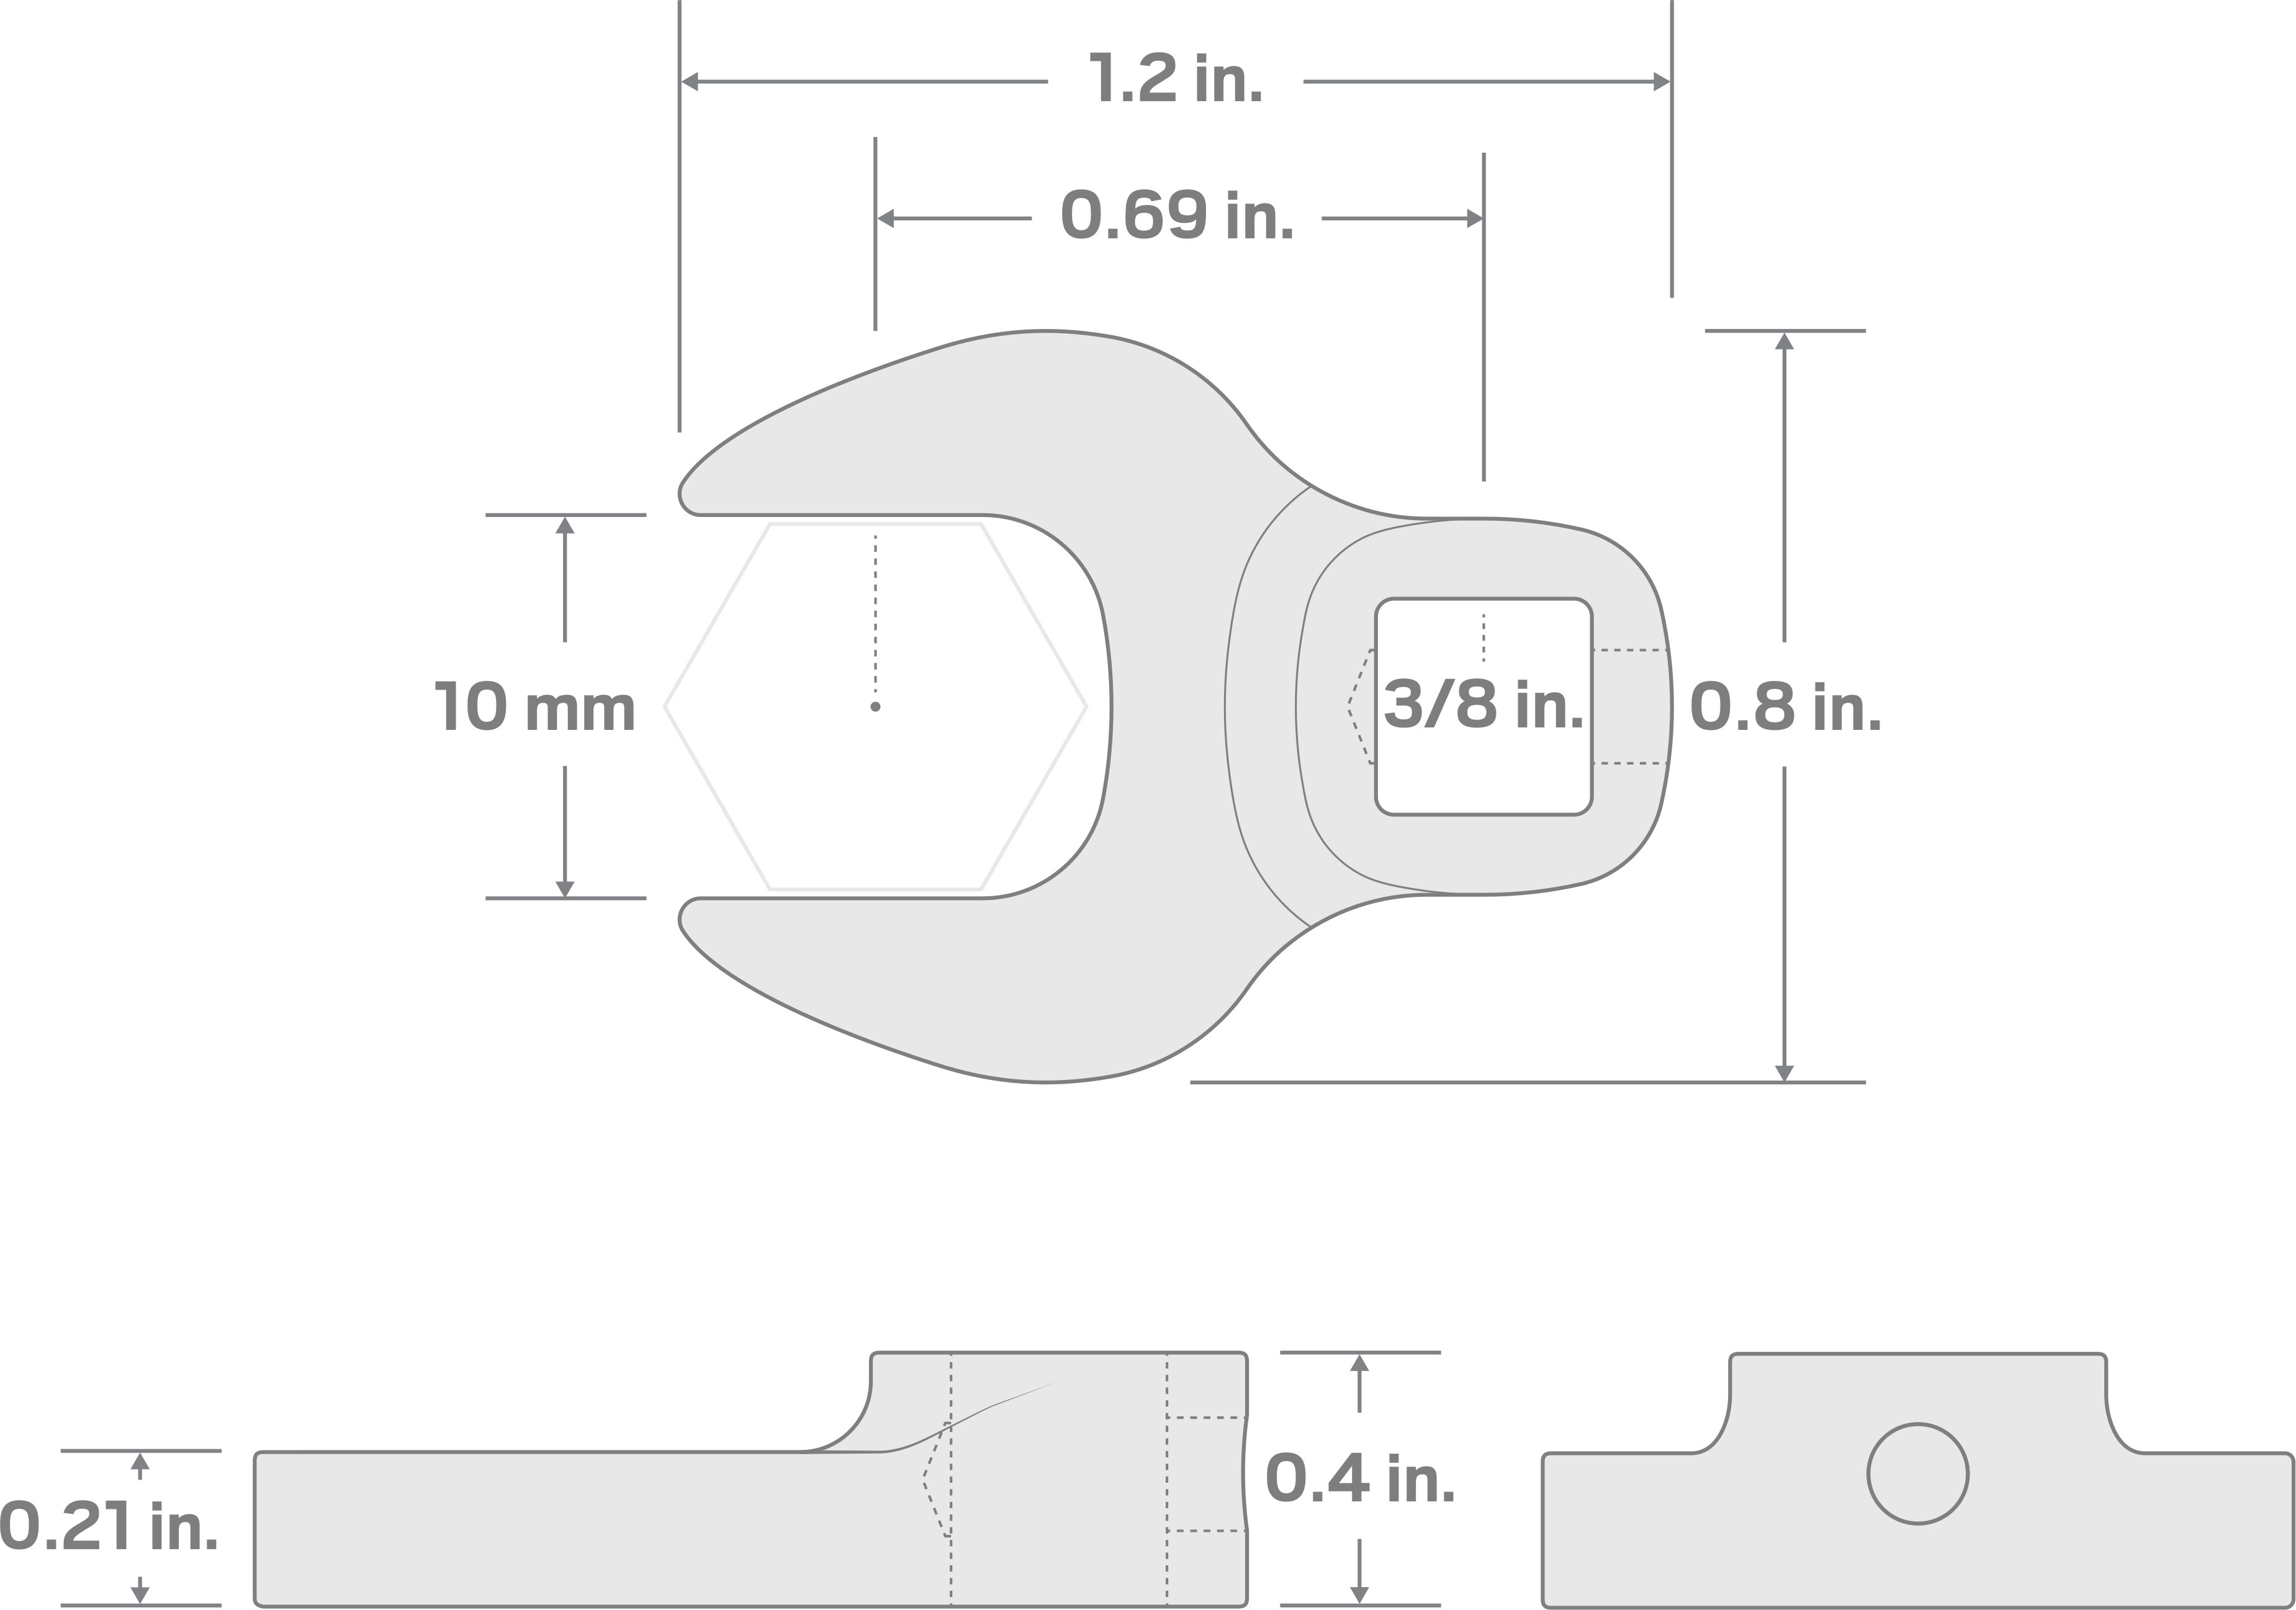 Specs for 3/8 Inch Drive x 10 mm Crowfoot Wrench